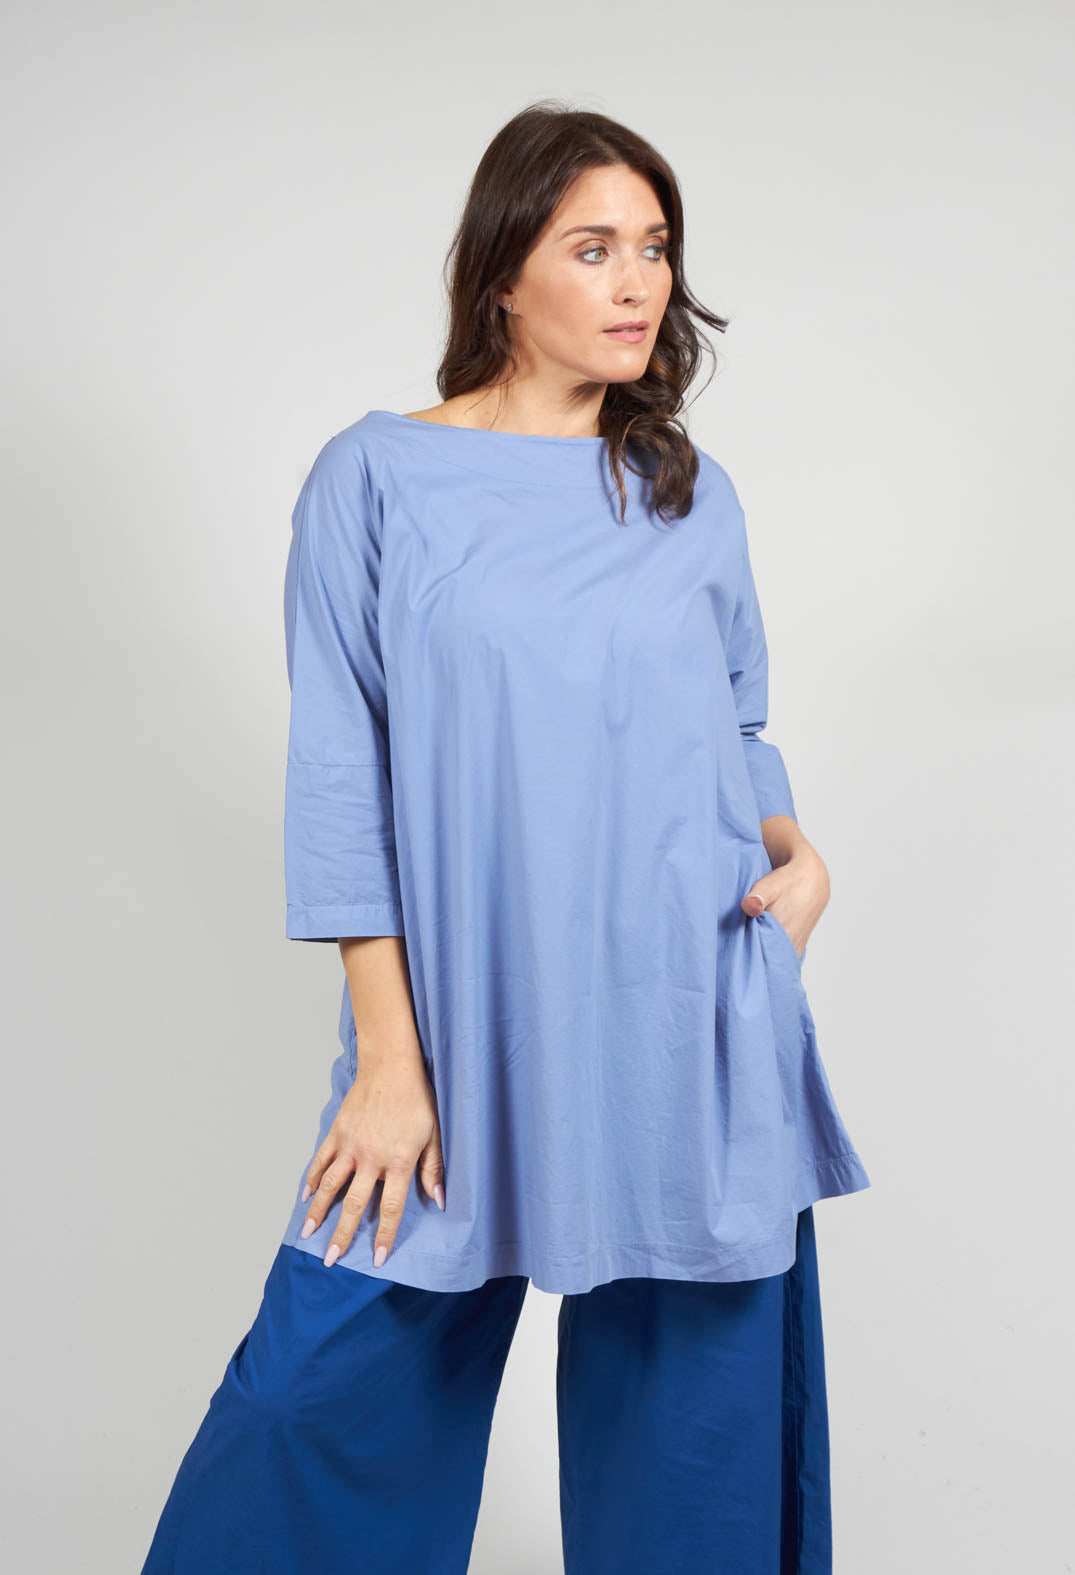 Verbena Relaxed Fit Top with Cowl Neck in Sky